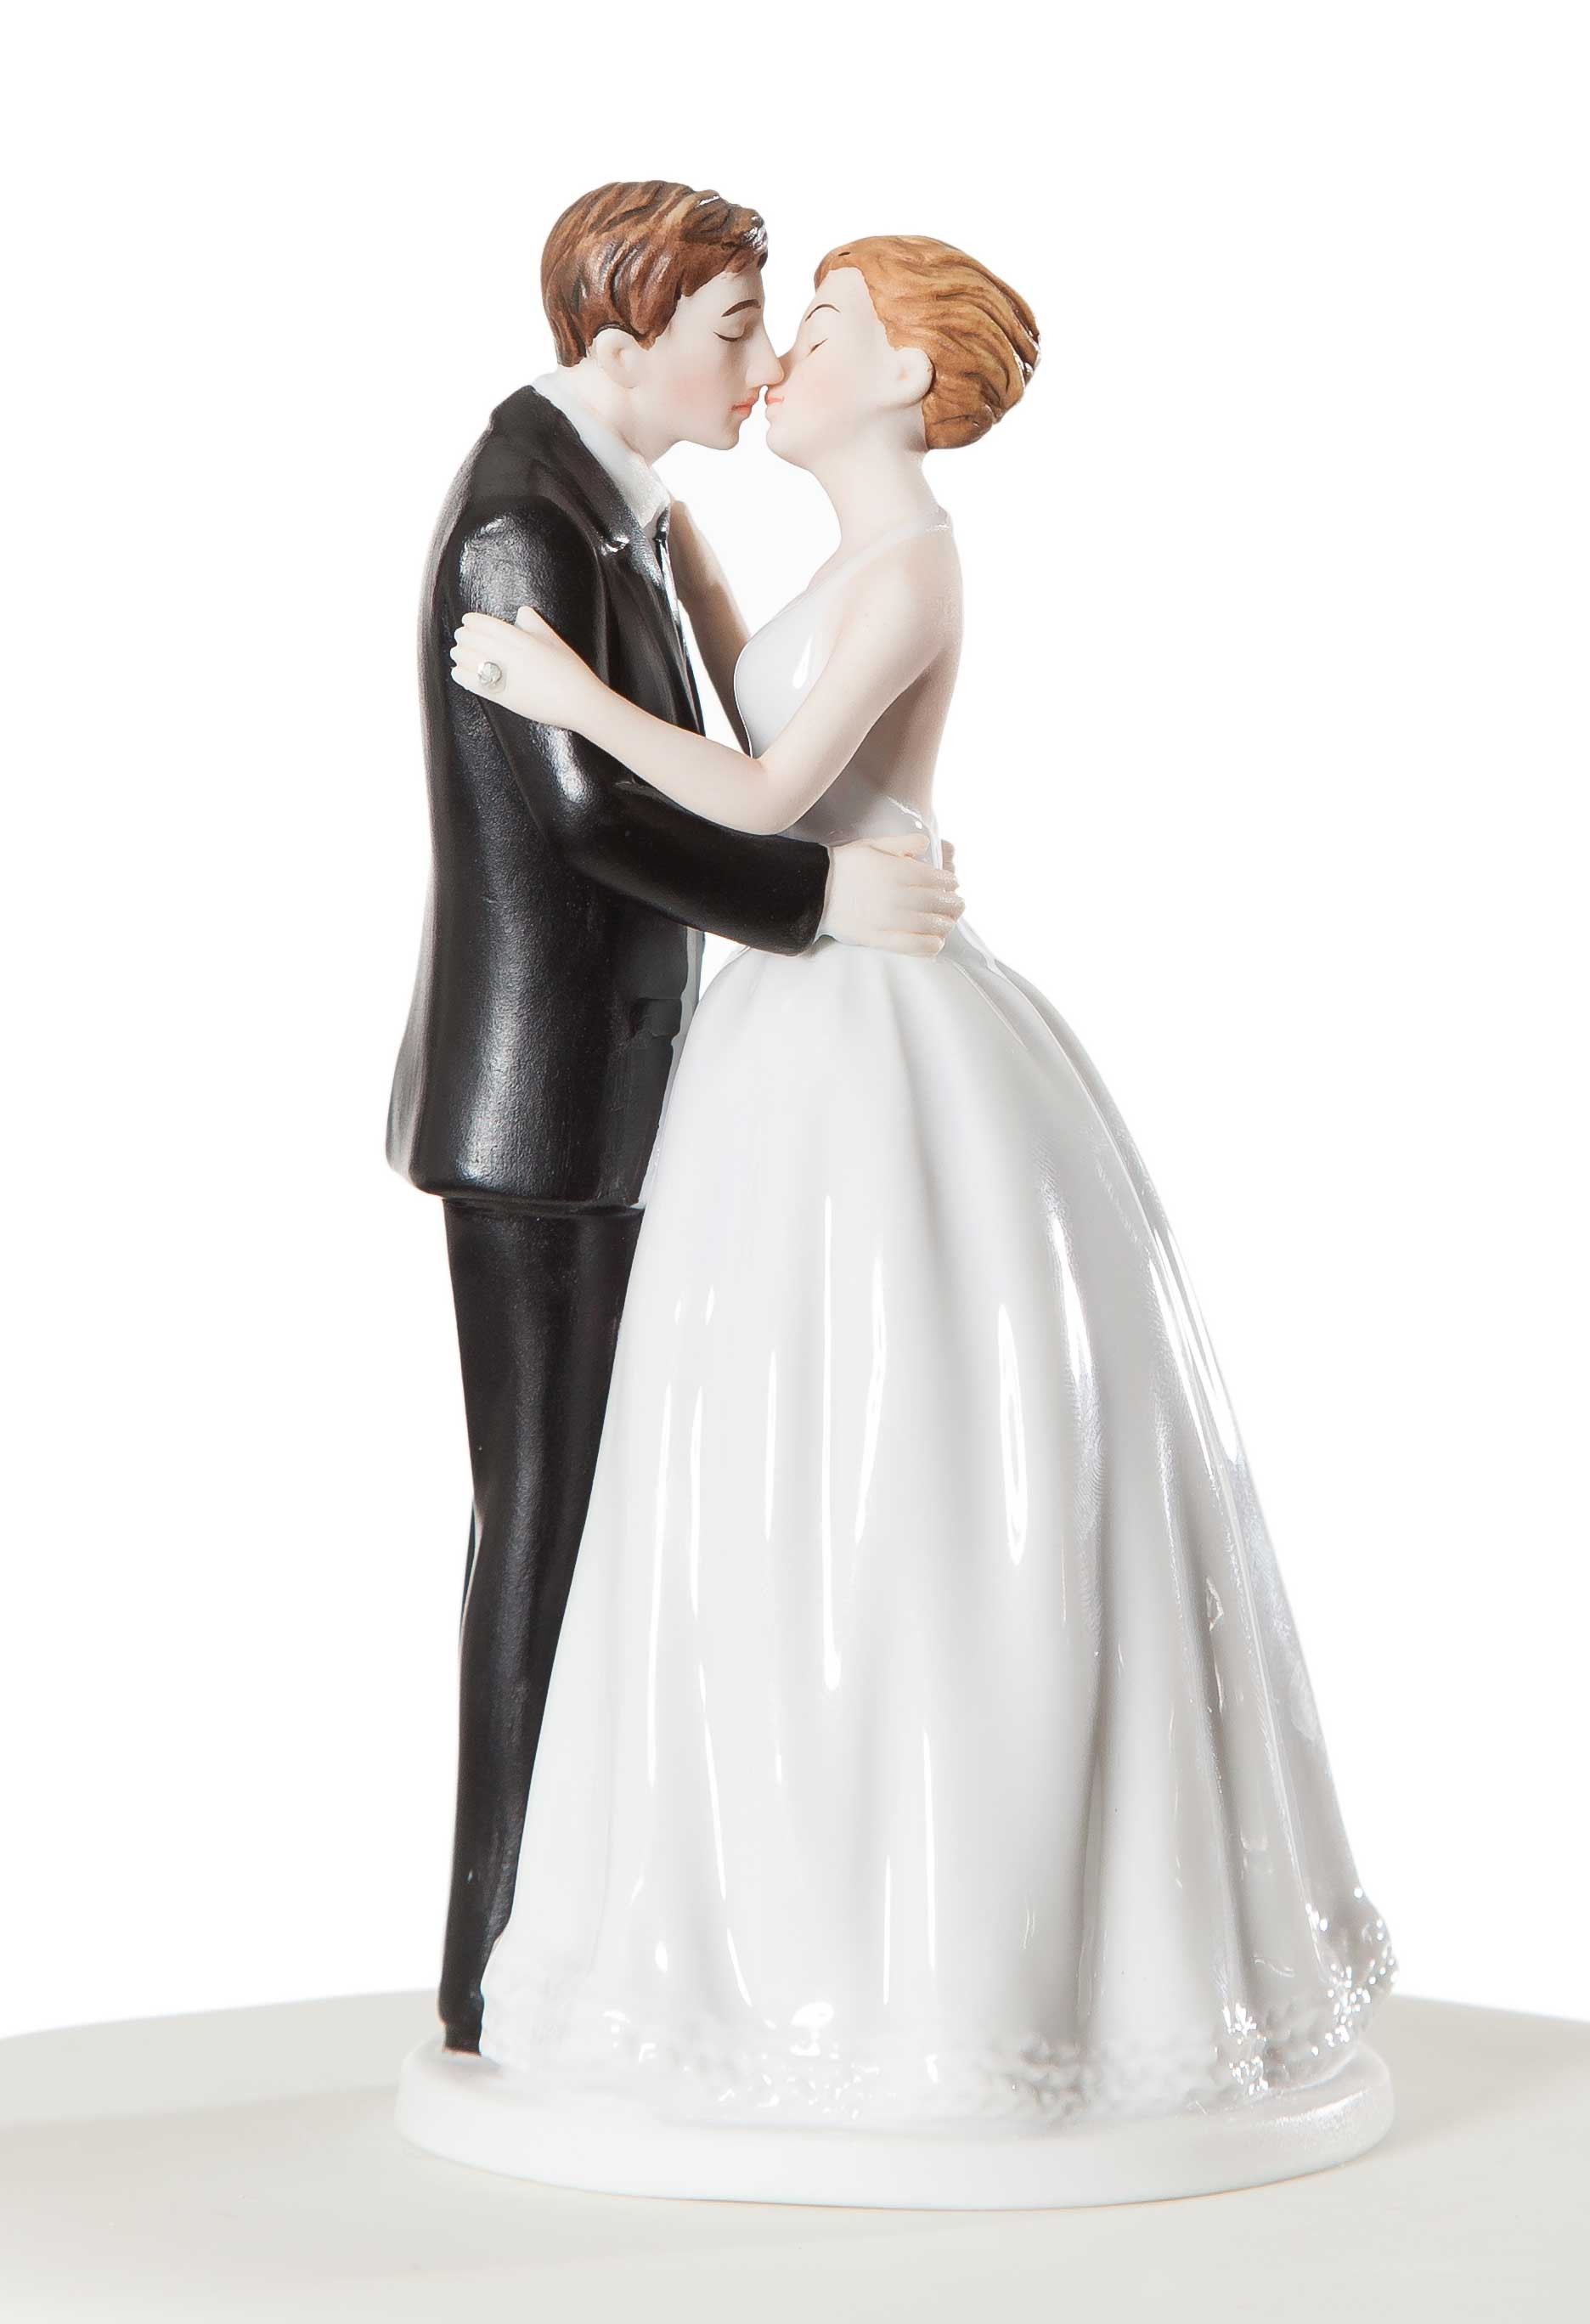 Wedding Cakes Tops
 Vintage Style Wedding Cake Toppers